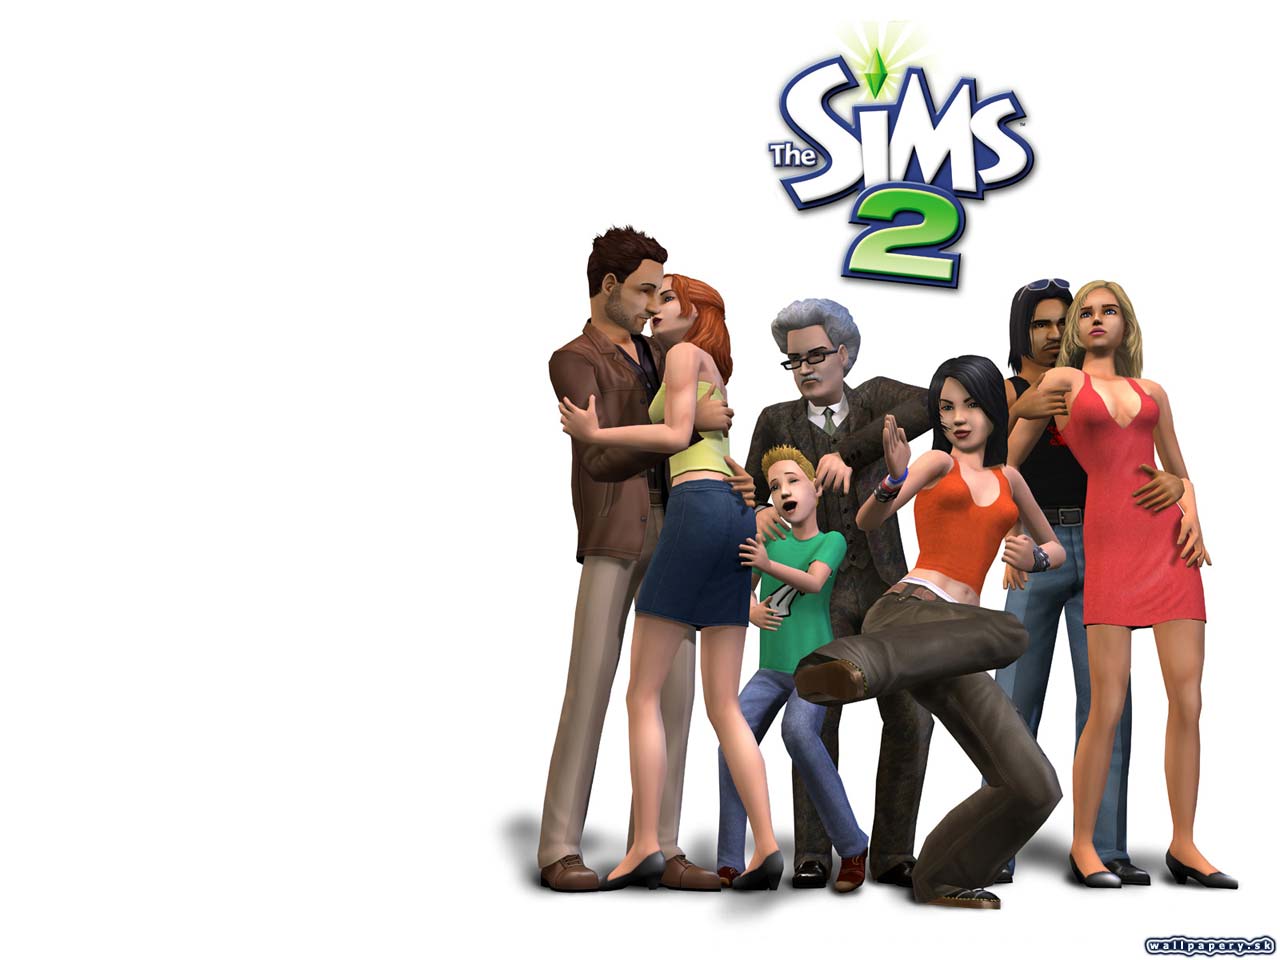 The Sims 2 - wallpaper 14